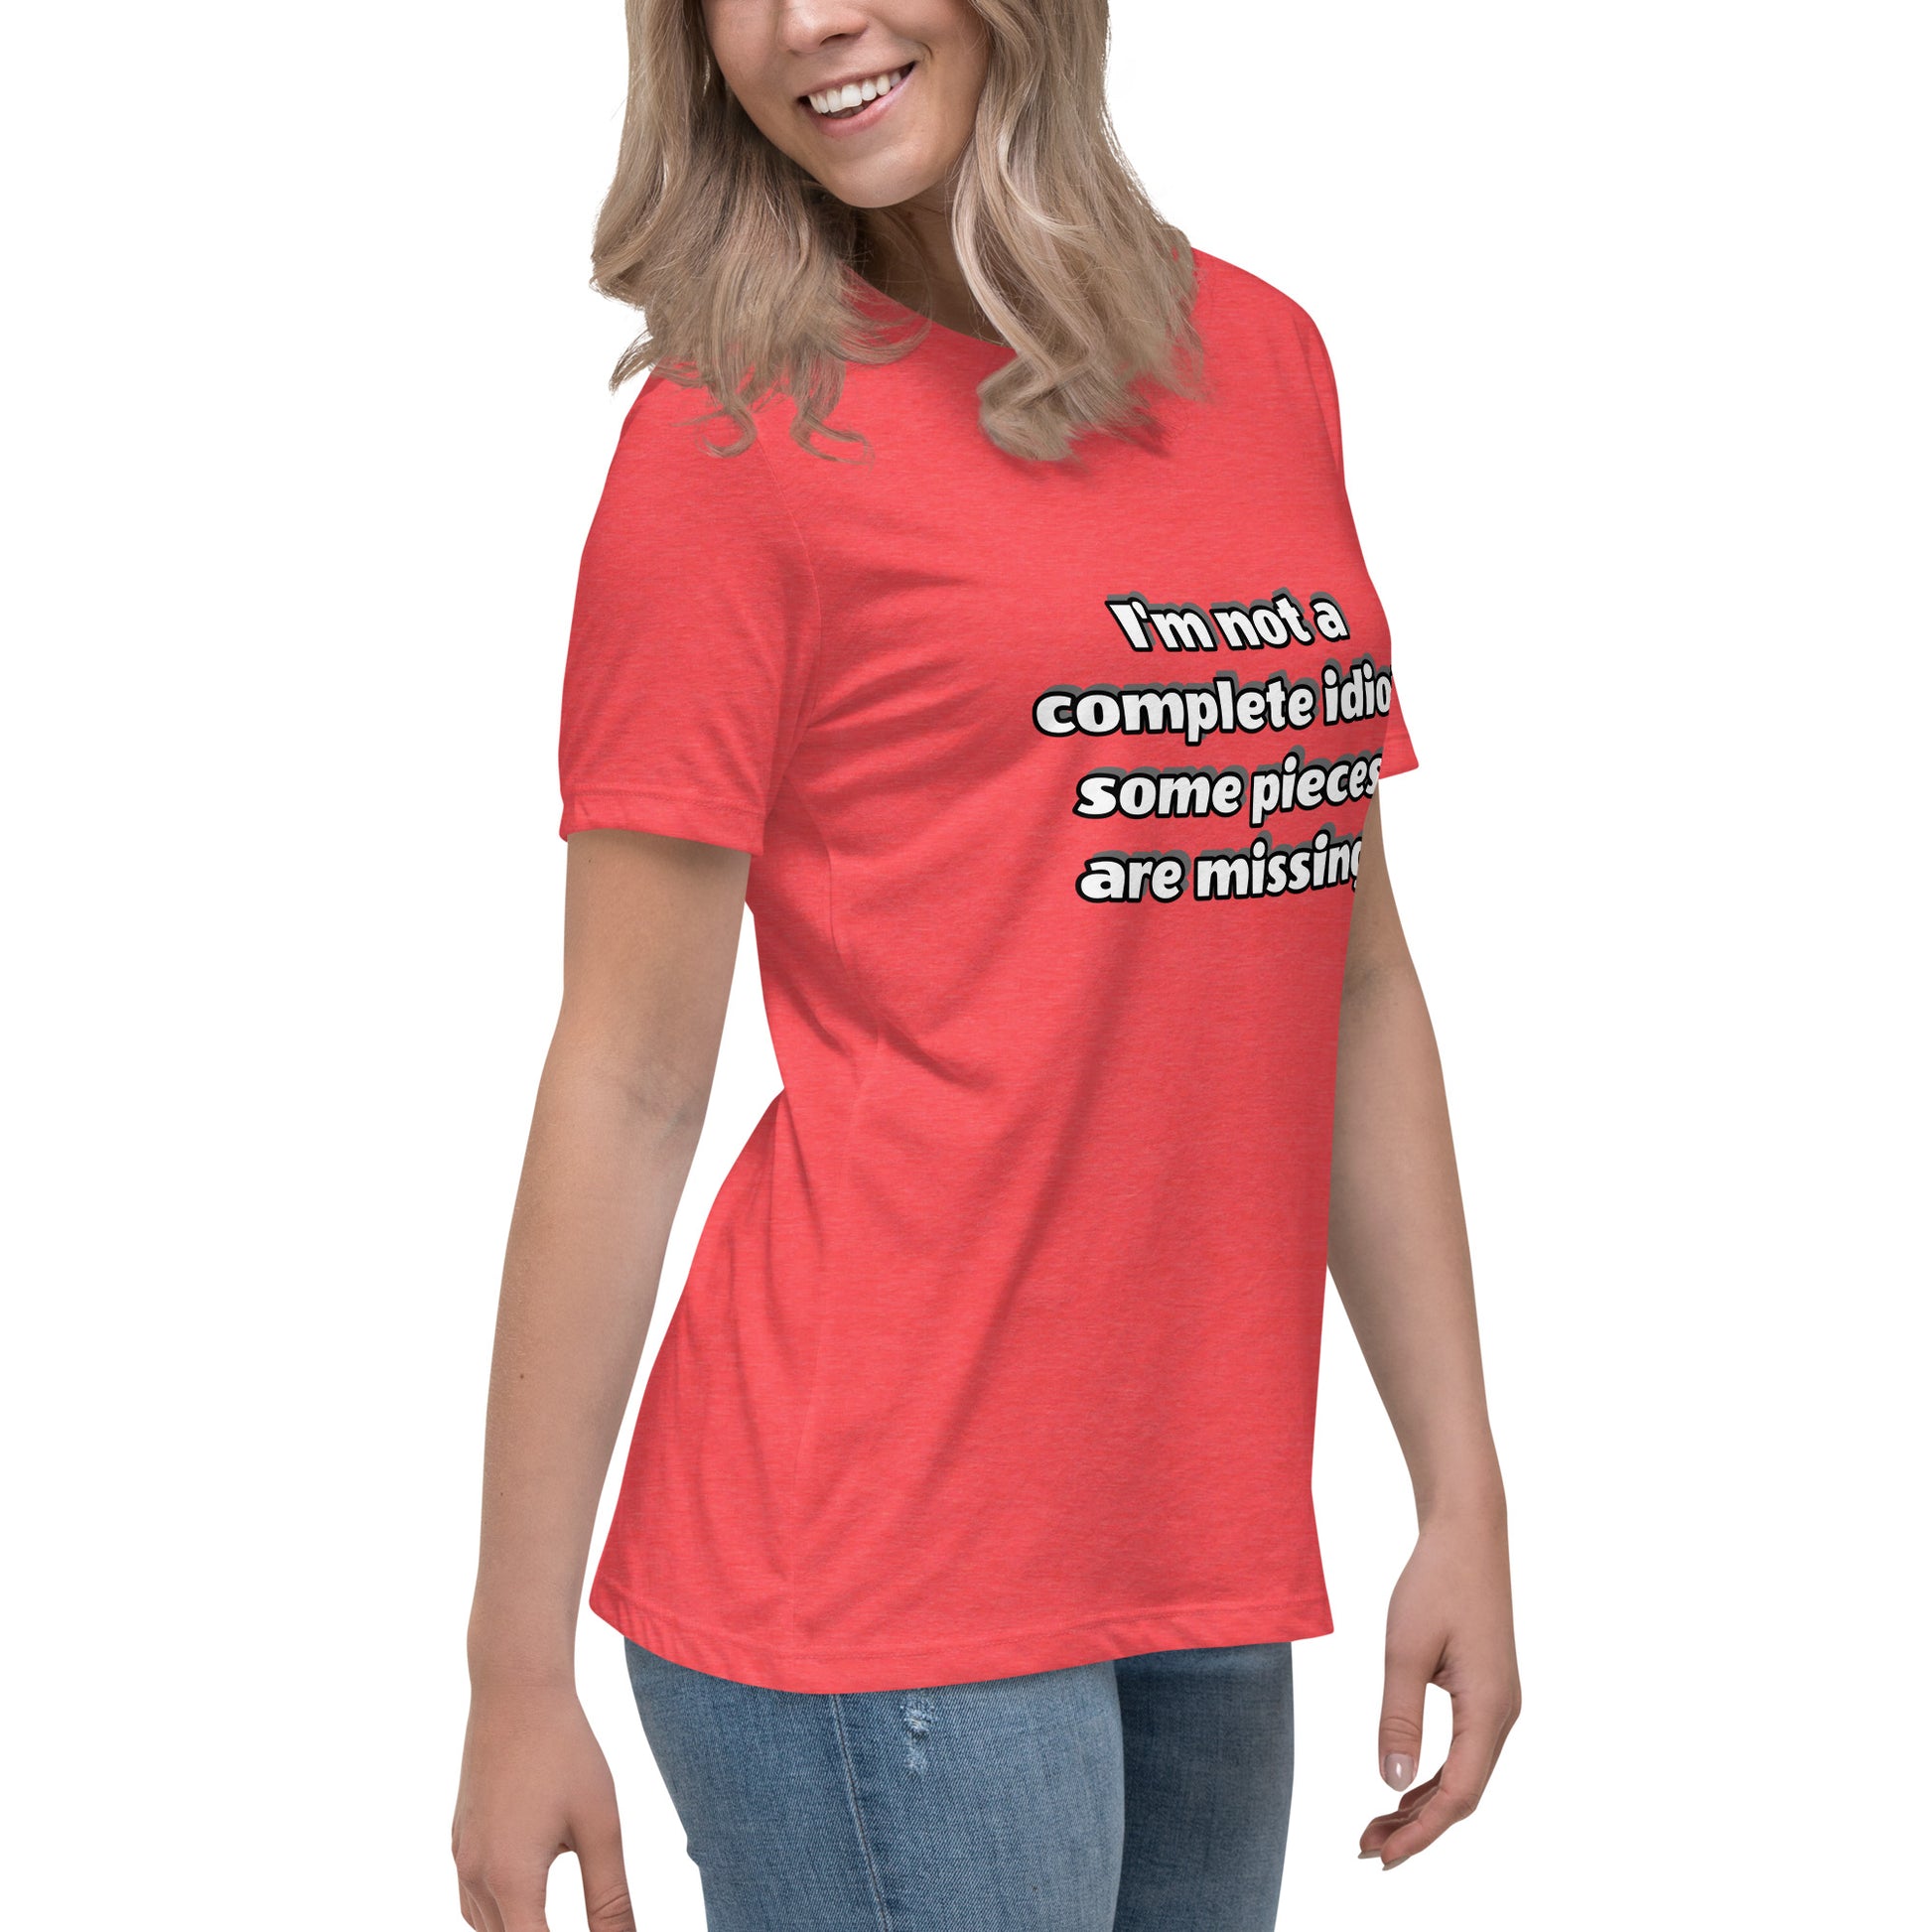 Women with red t-shirt with text “I’m not a complete idiot, some pieces are missing”